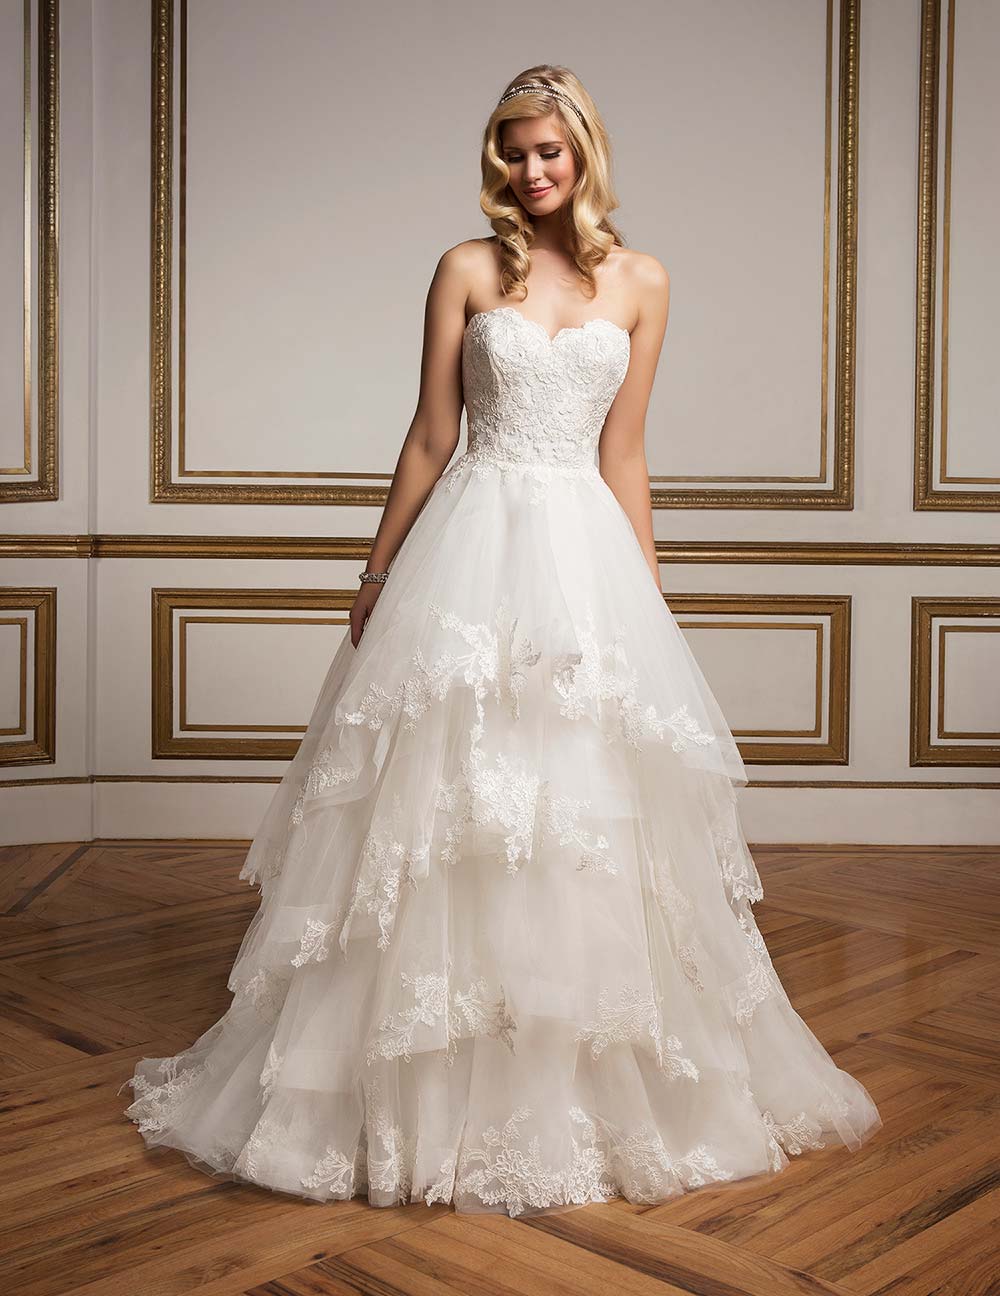 Best Tiered Wedding Dress in 2023 The ultimate guide 